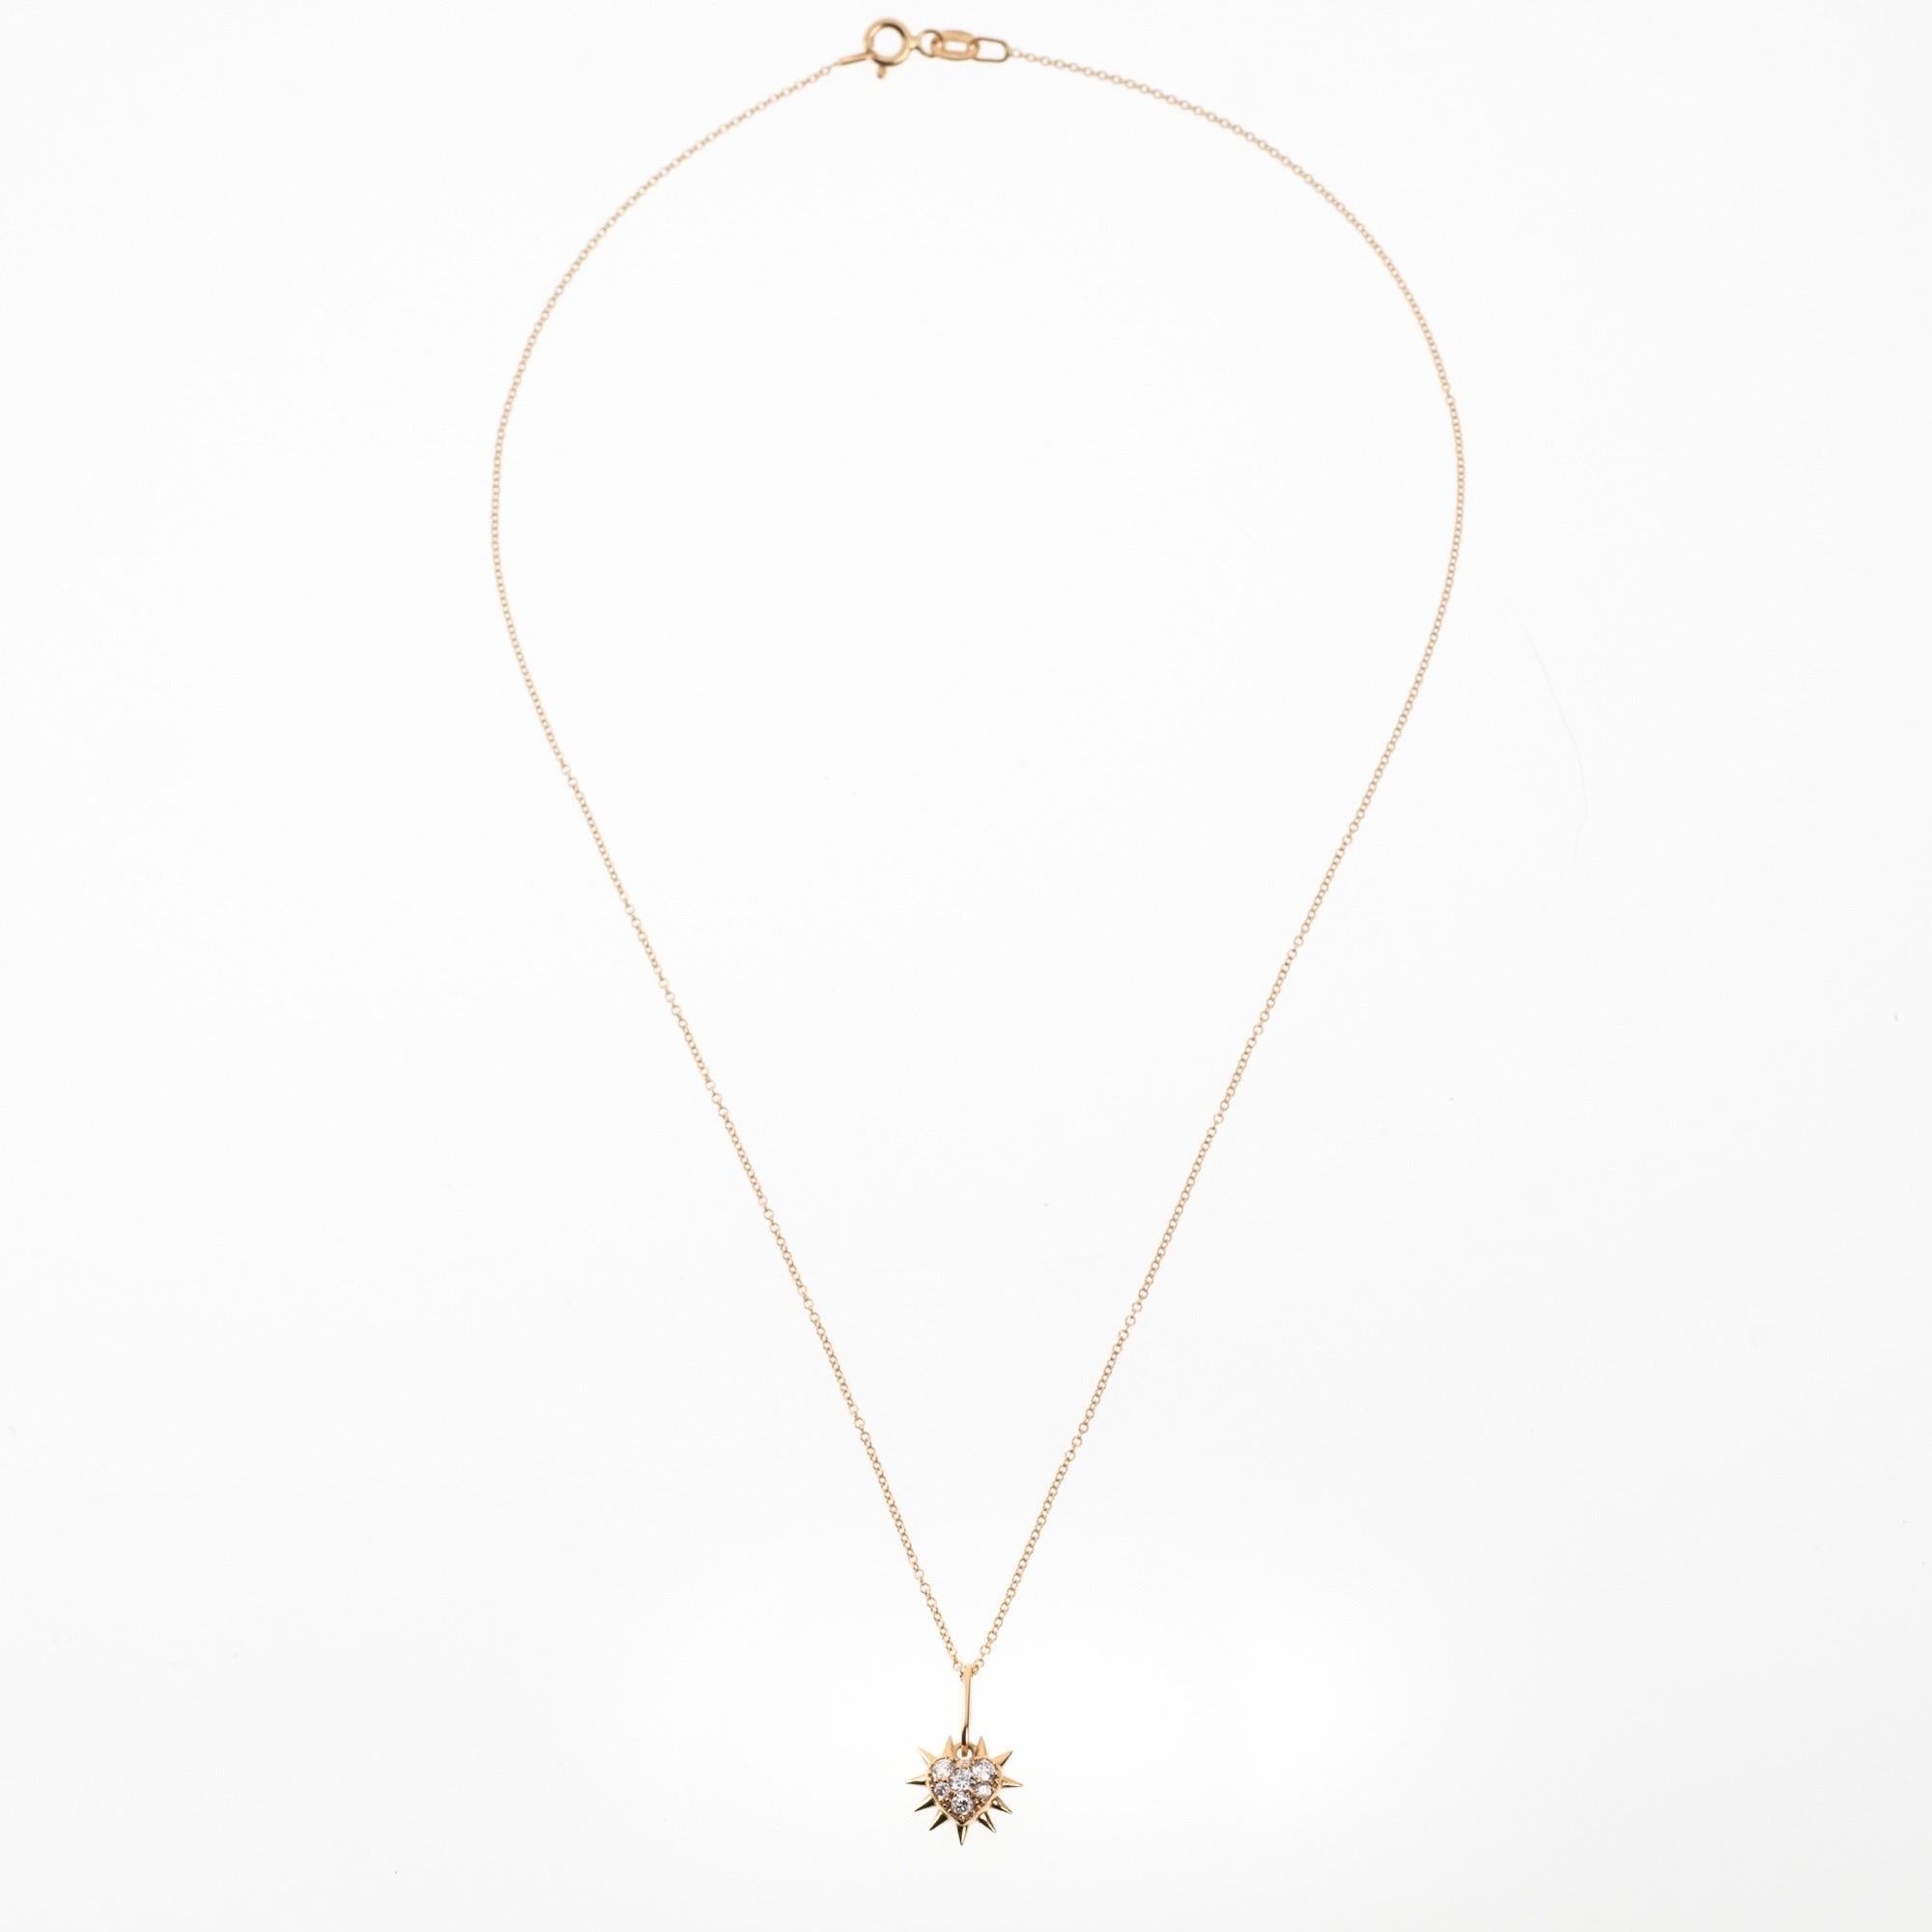 The ‘Thorny heart’ pendant necklace is crafted in 18K gold hallmarked in Cyprus. This cute heart pendant necklace, comes in a highly polished finish and is set with 0.21 Cts of White Diamonds. The charm can be purchased alone or with a standard 40